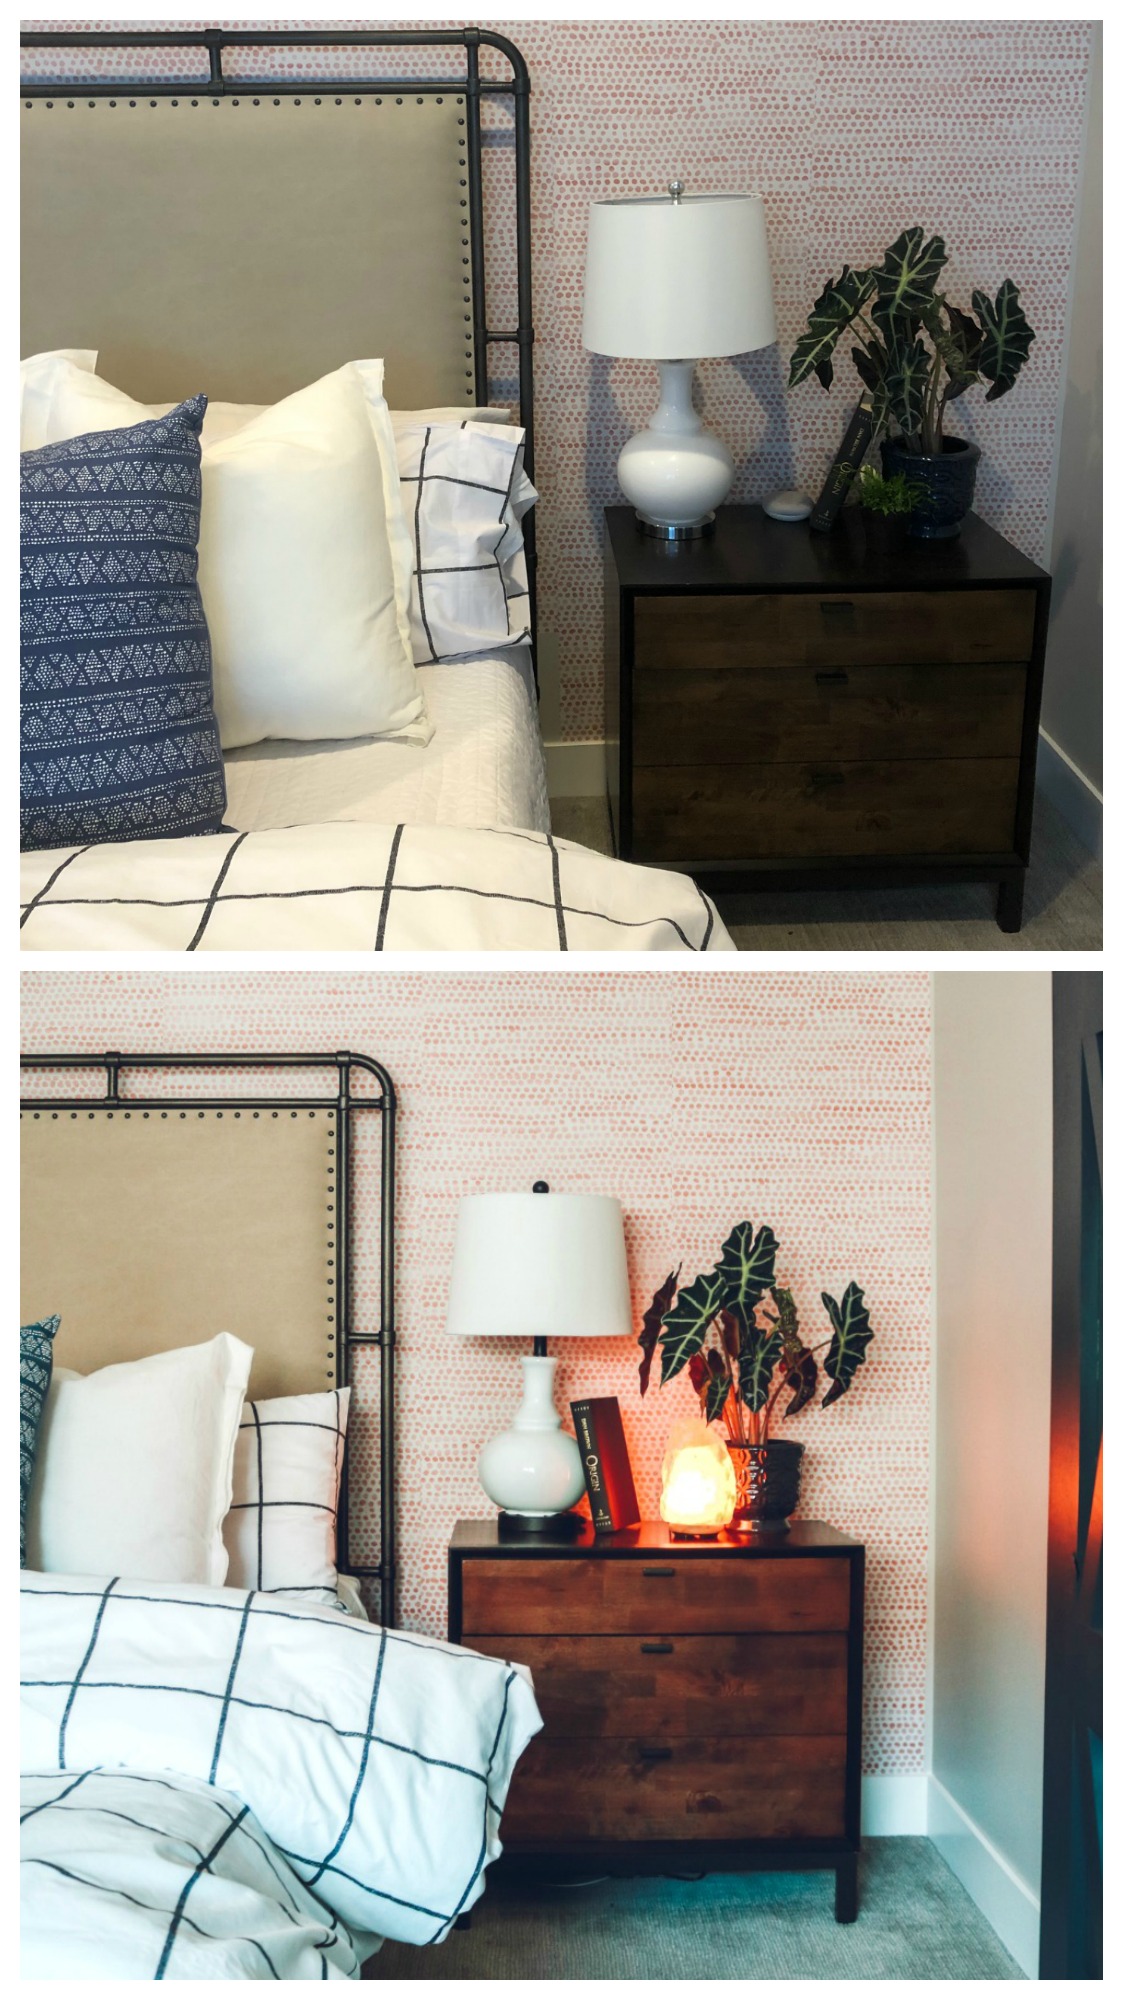 5 Simple Changes to Transform a Bedroom